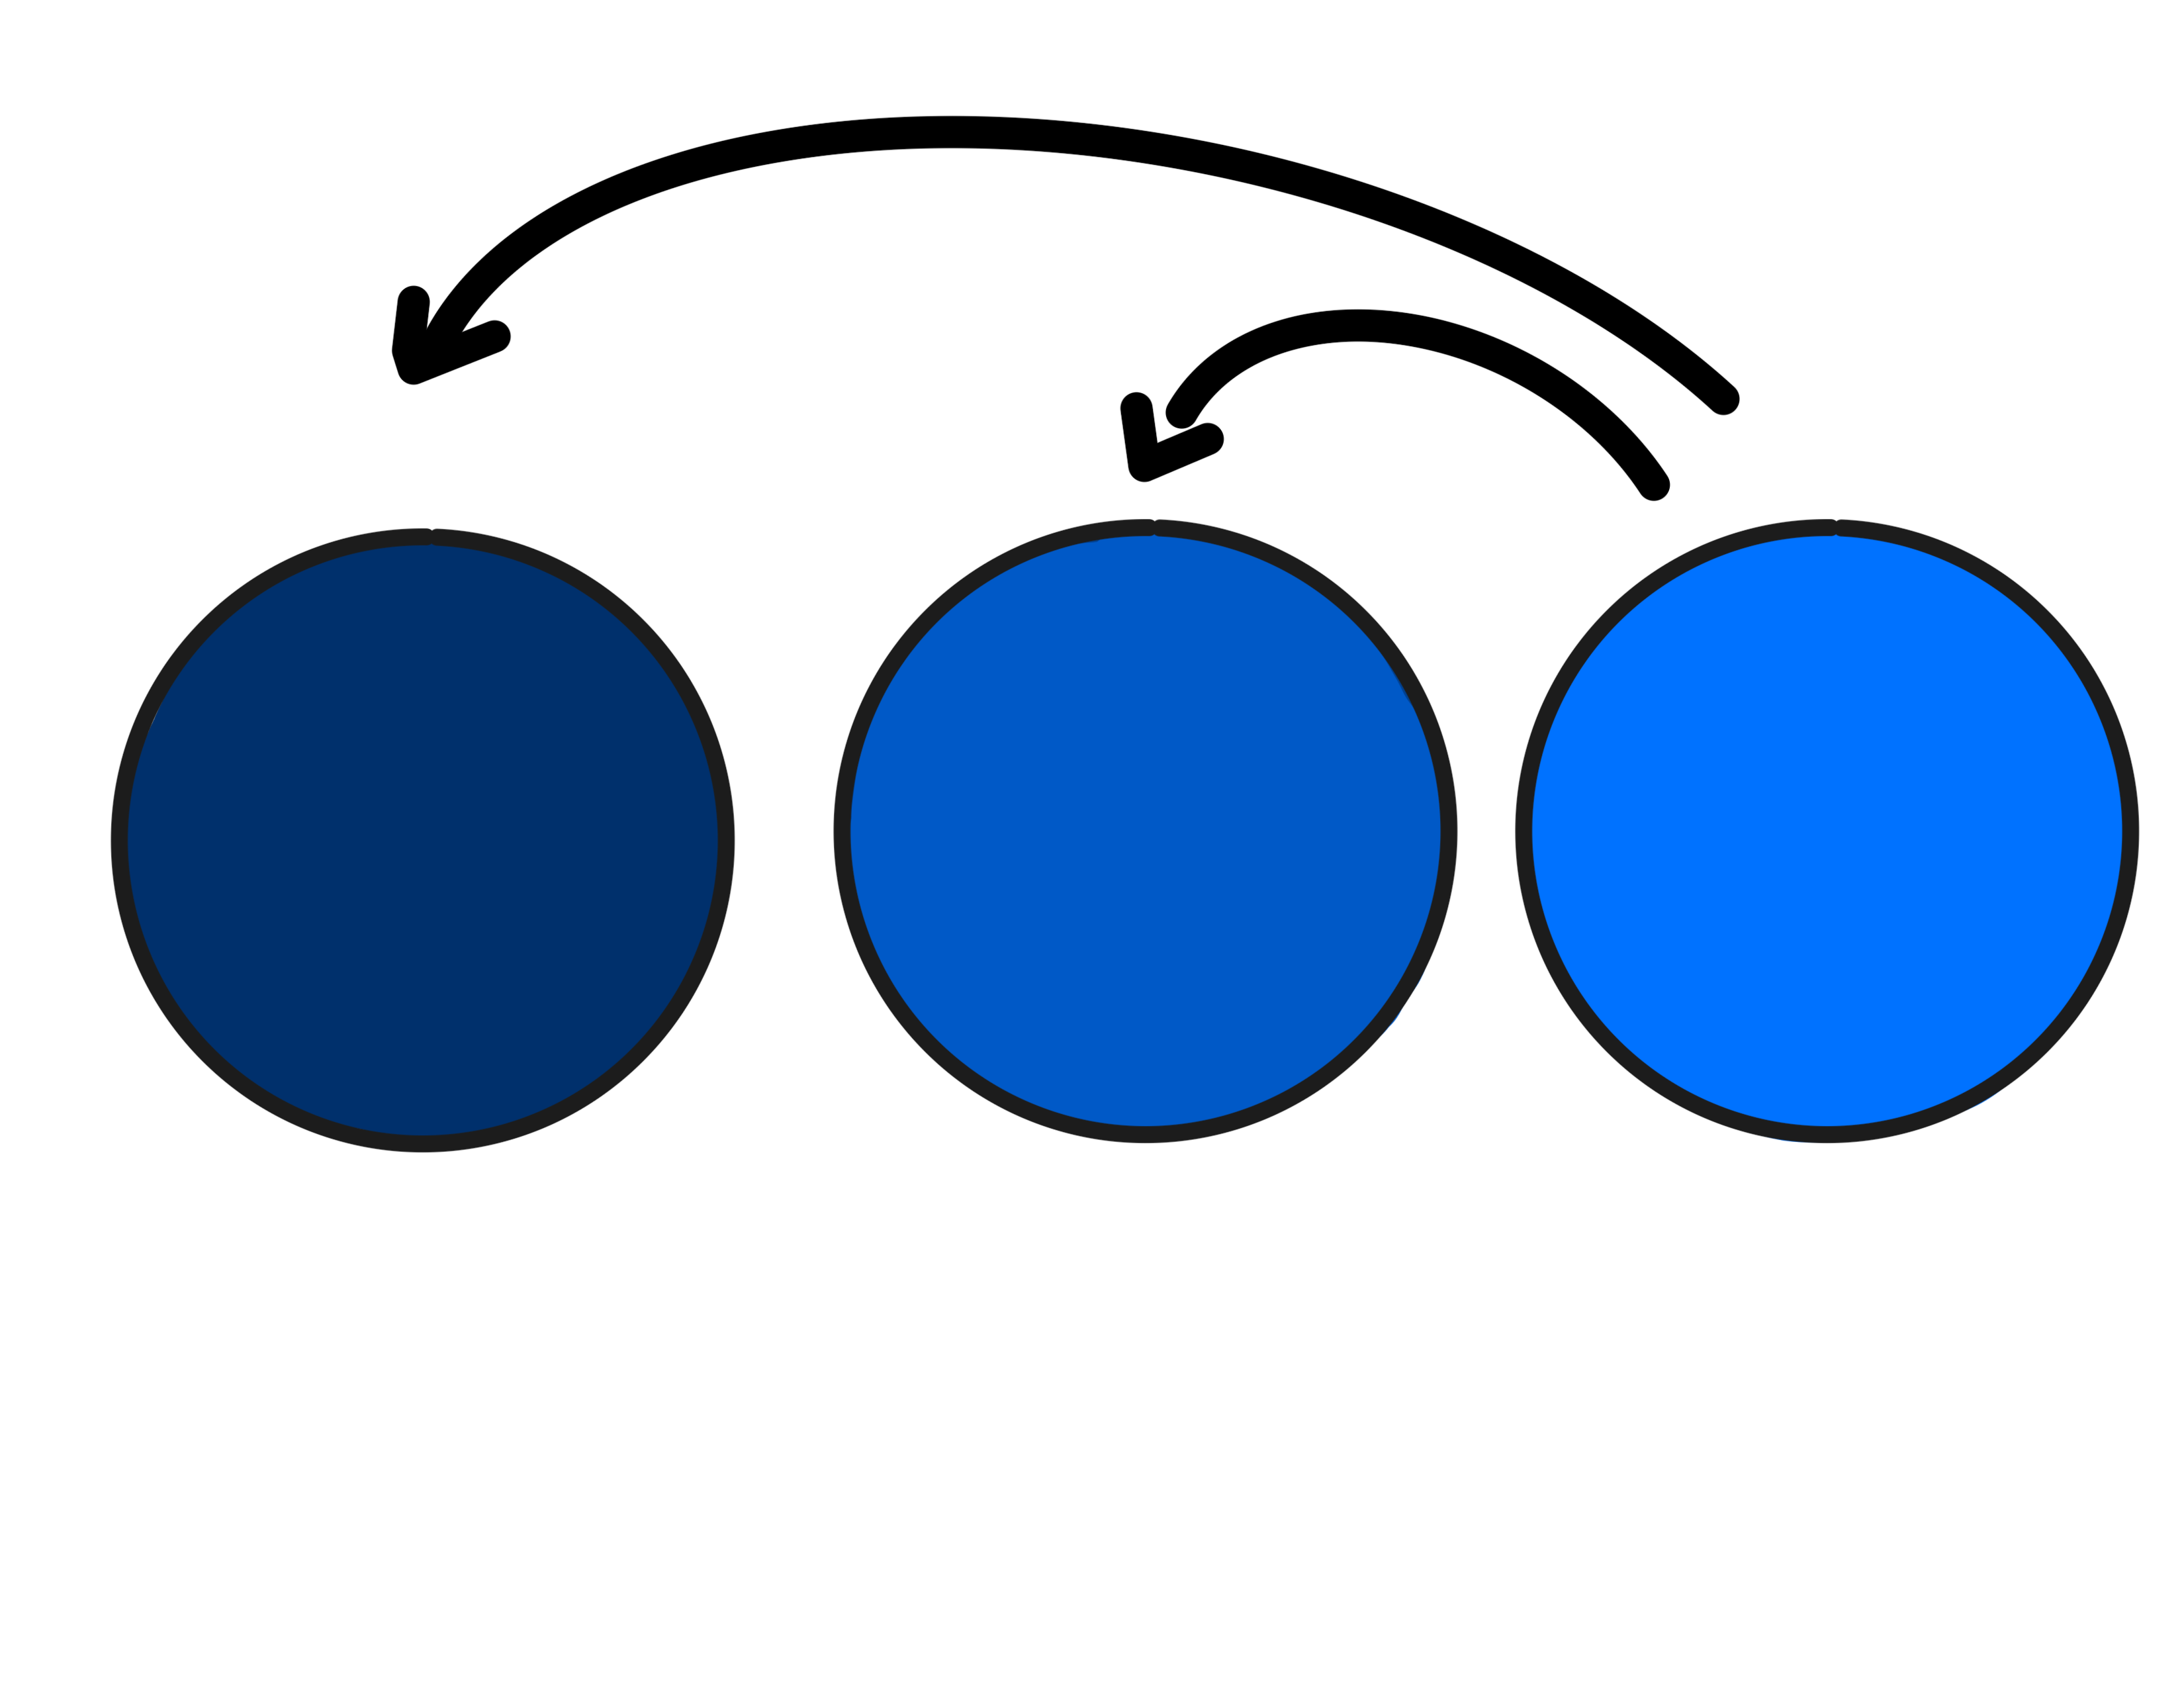 A series of blue circles They go from dark blue on the left to light blue on the right. Above them are two arrows originating from the lightest circle one arrow points to the darkest circle and the second points to the middle circle 